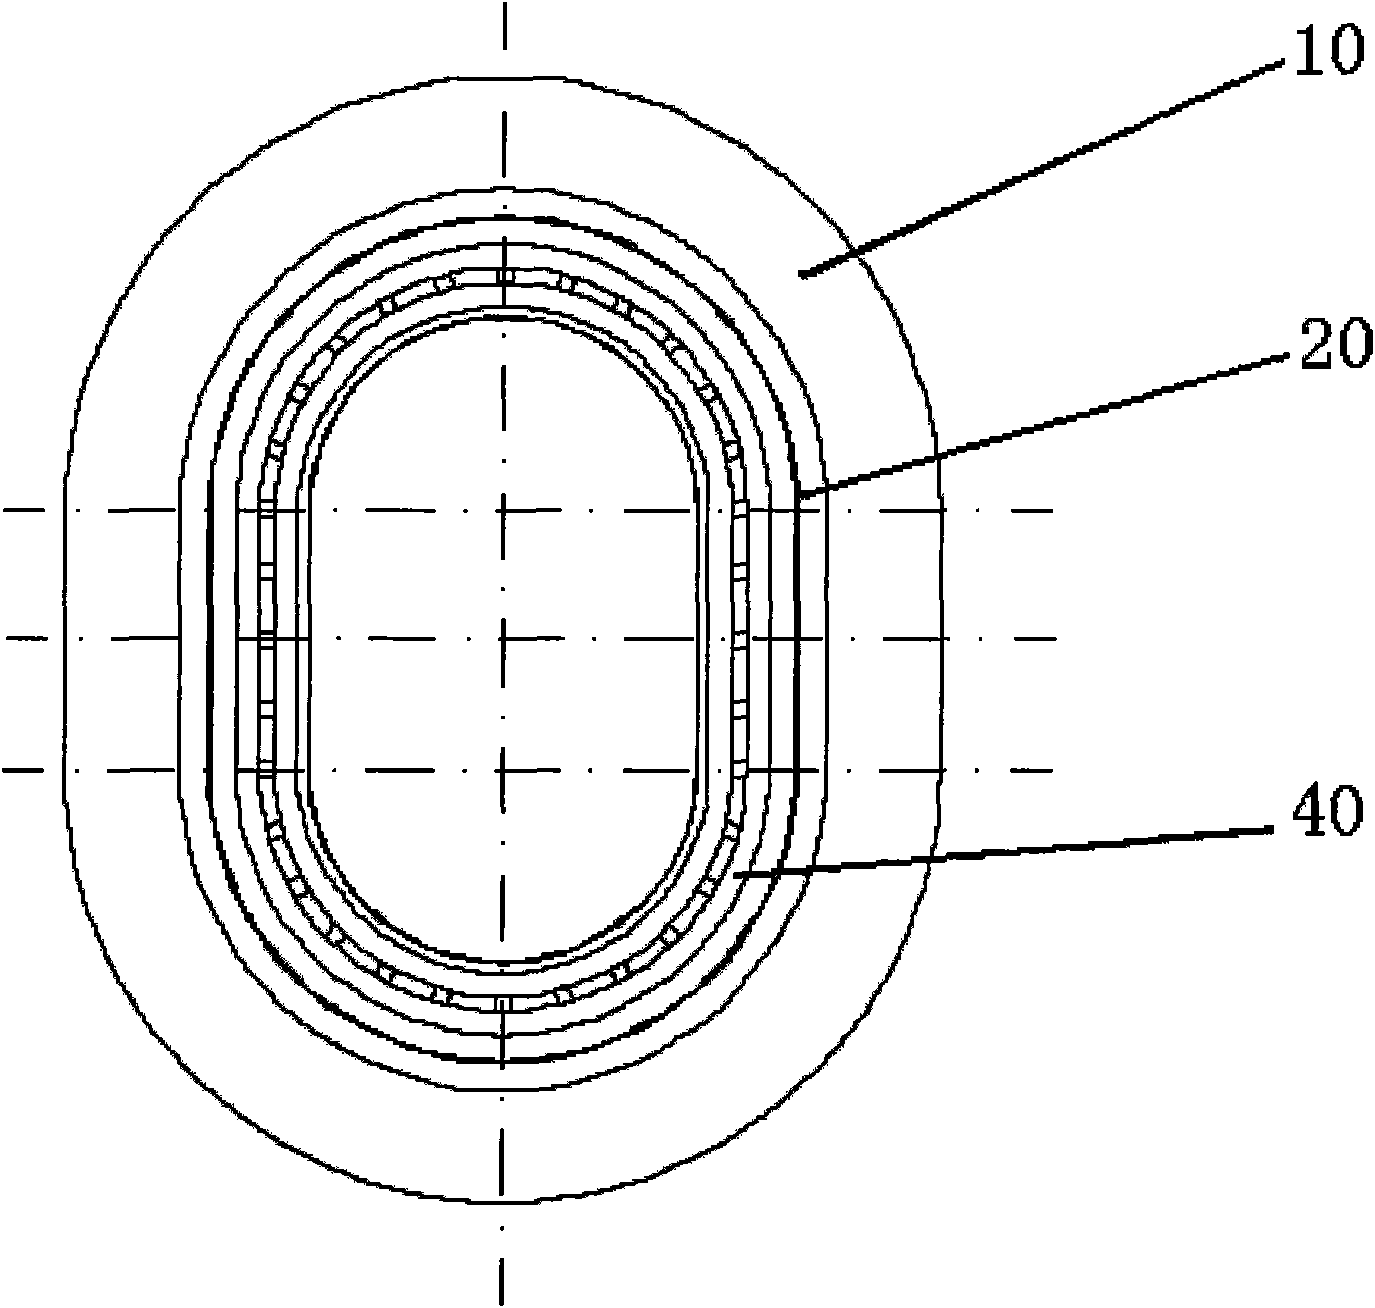 Structure between high-tension coil and low-tension coil in transformer